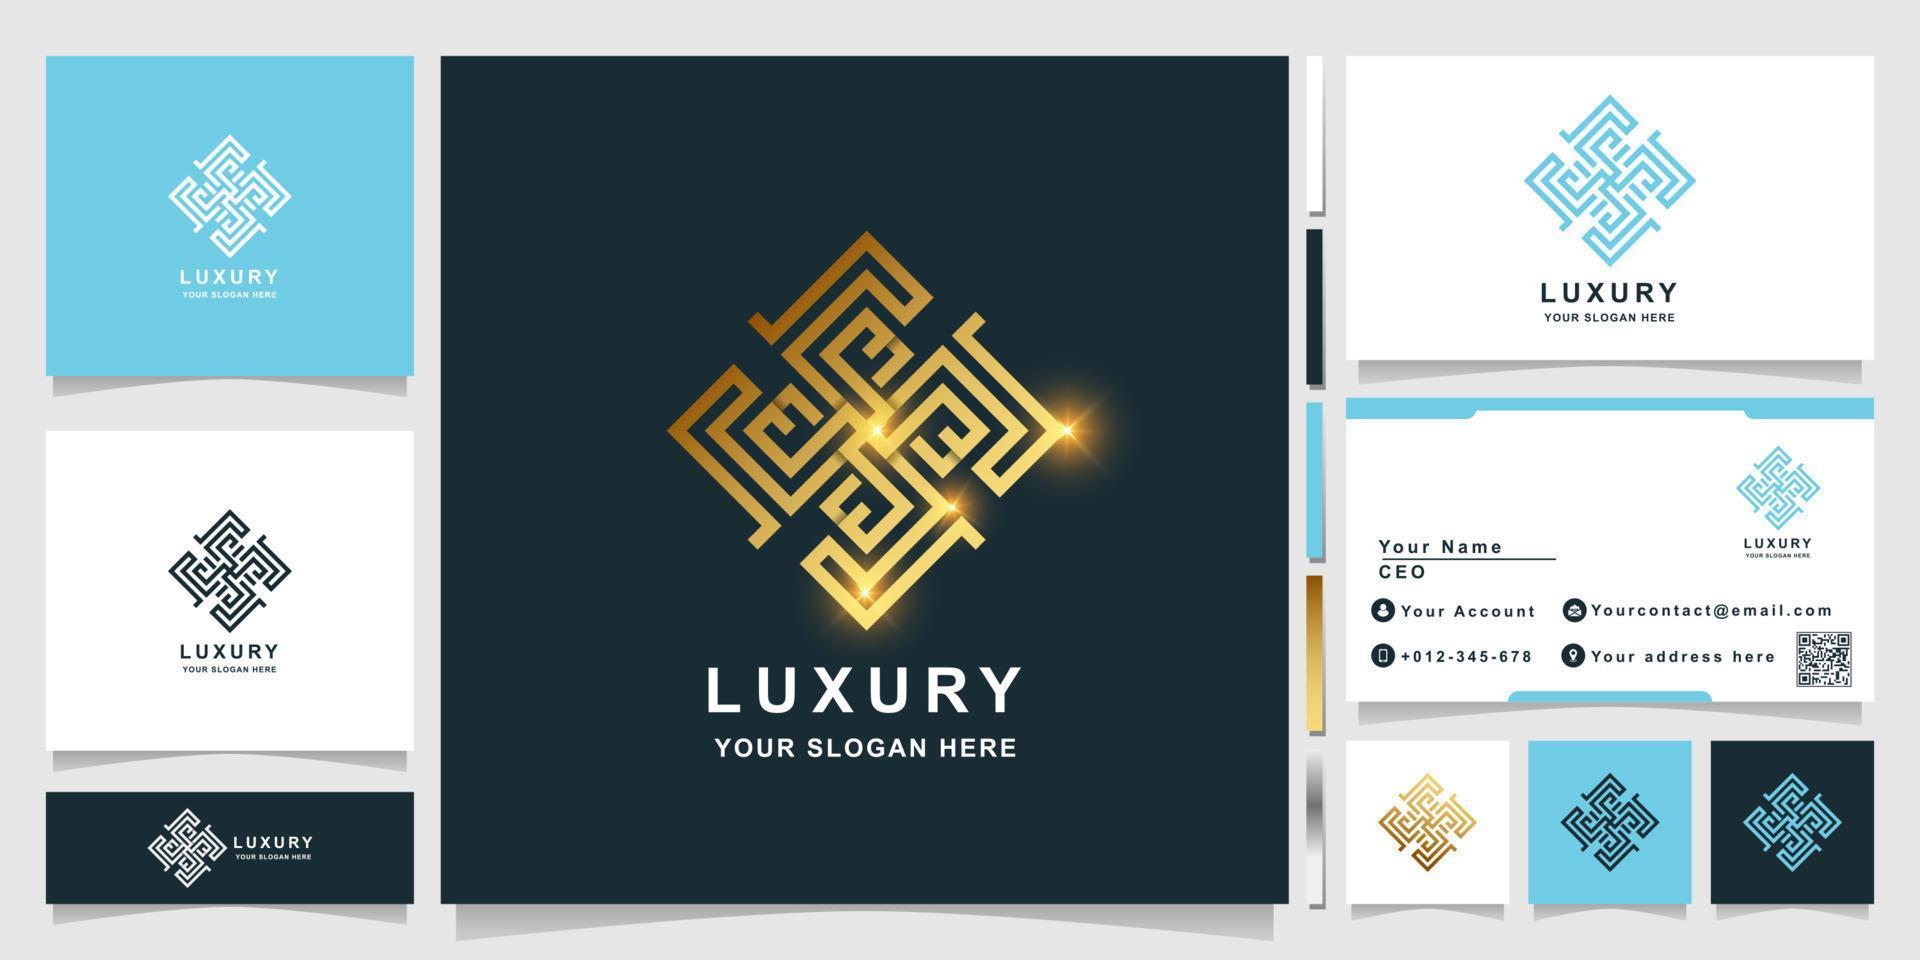 Luxury ornament logo template with business card design. vector